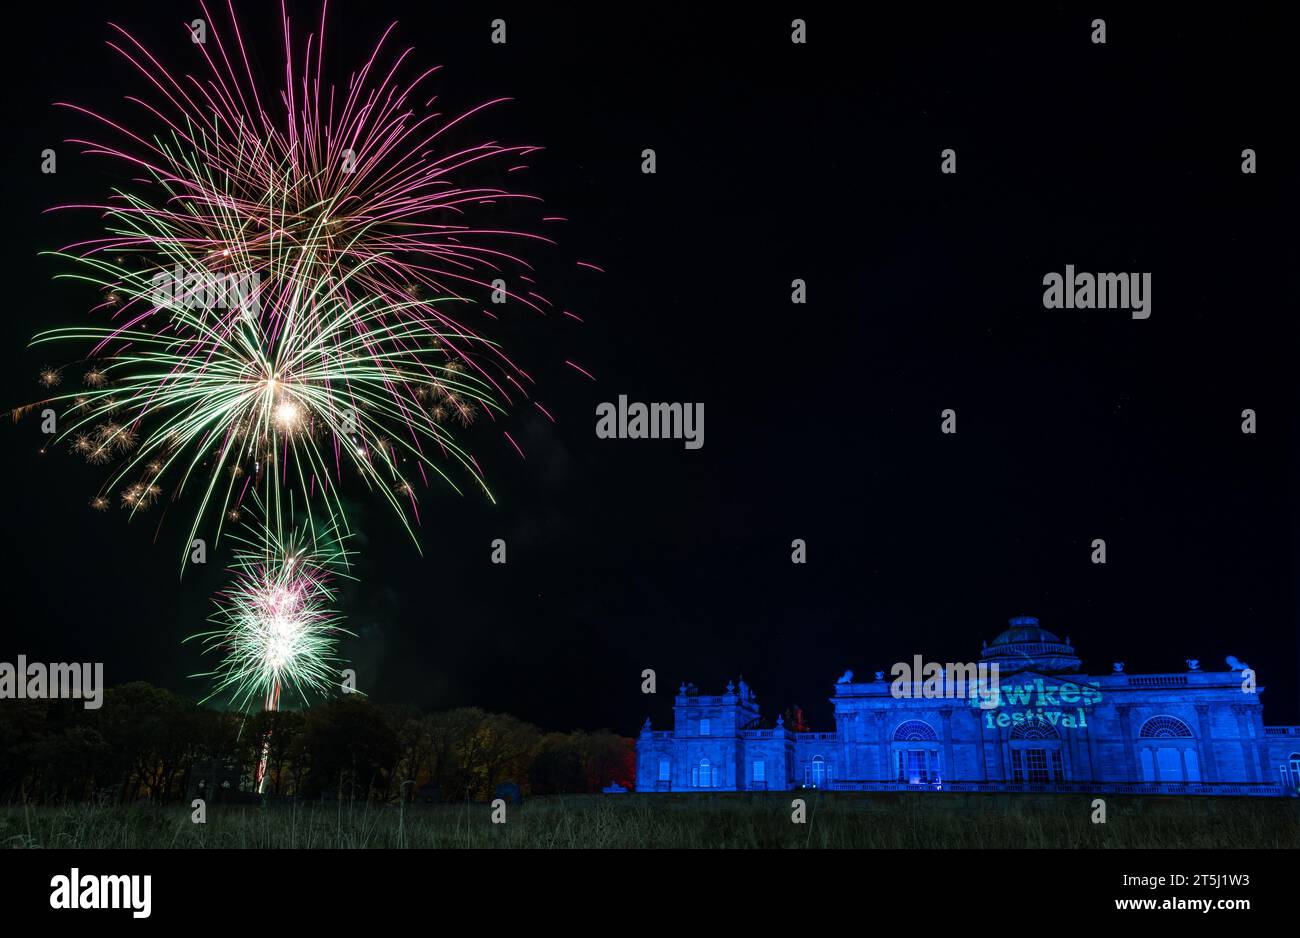 Gosford House, East Lothian, Scotland, UK, 5th November 2023. Fawkes Festival: the fireworks event takes place in the Gosford Estate to celebrate Guy Fawkes night. A large scale fireworks display bursts in the nght sky by the stately country mansion. Credit: Sally Anderson/Alamy Live News Stock Photo